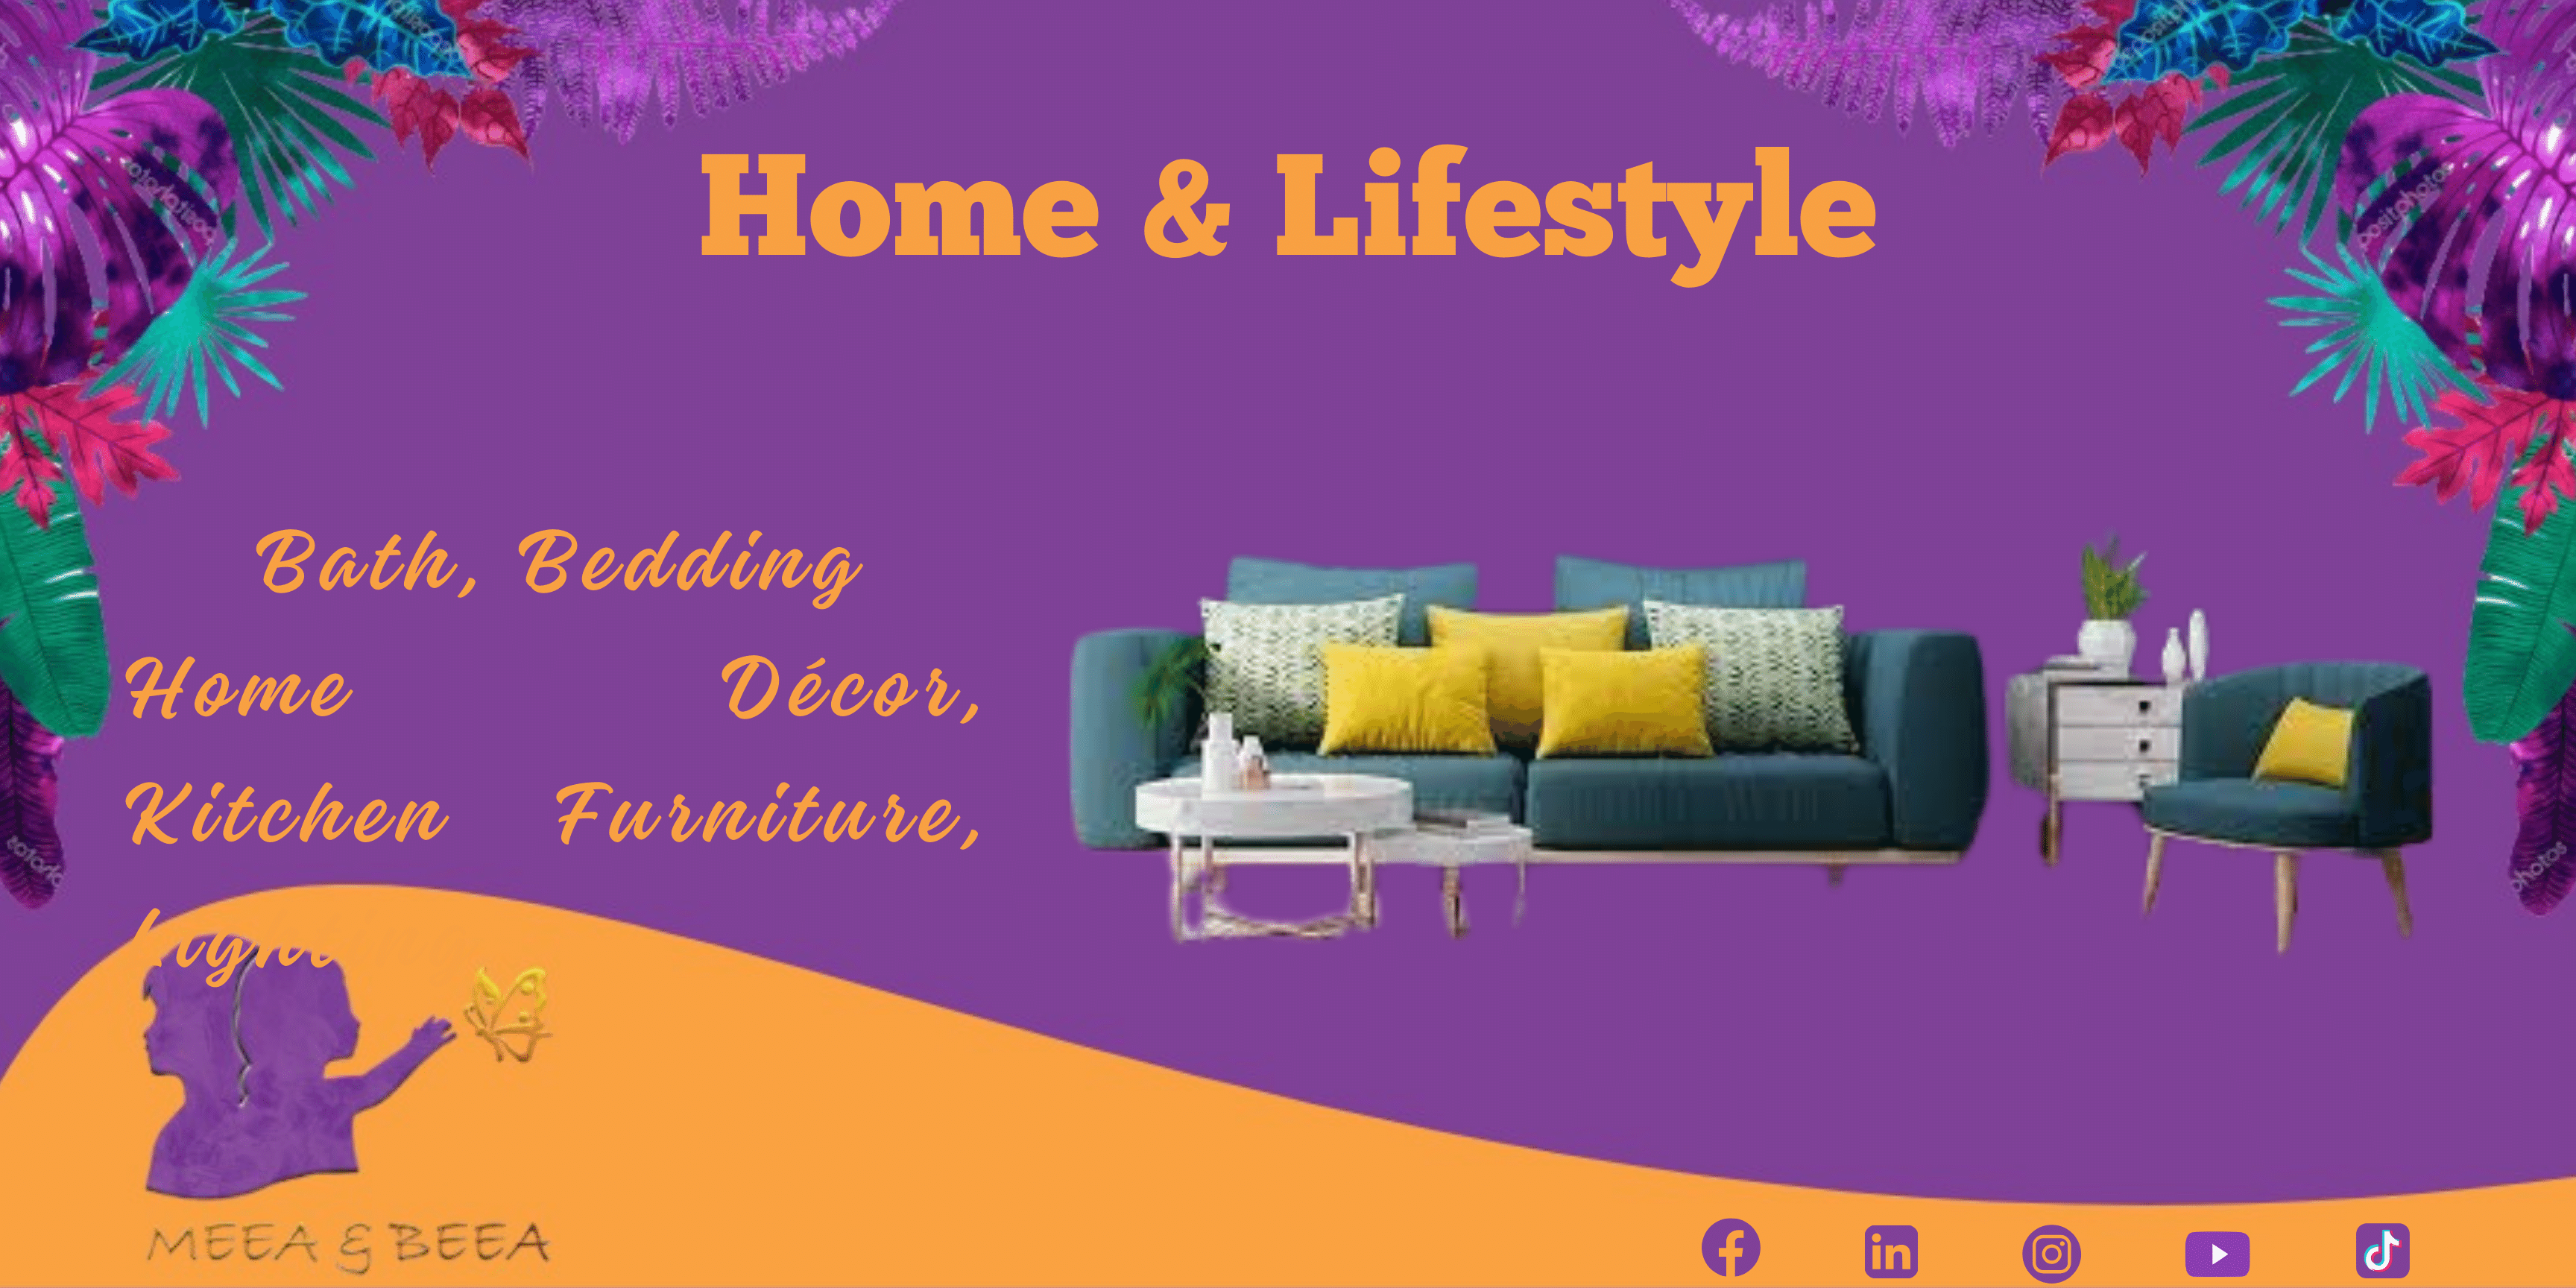 Cheap Furniture and Home Décor Items in Dubai, UAE and Pakistan